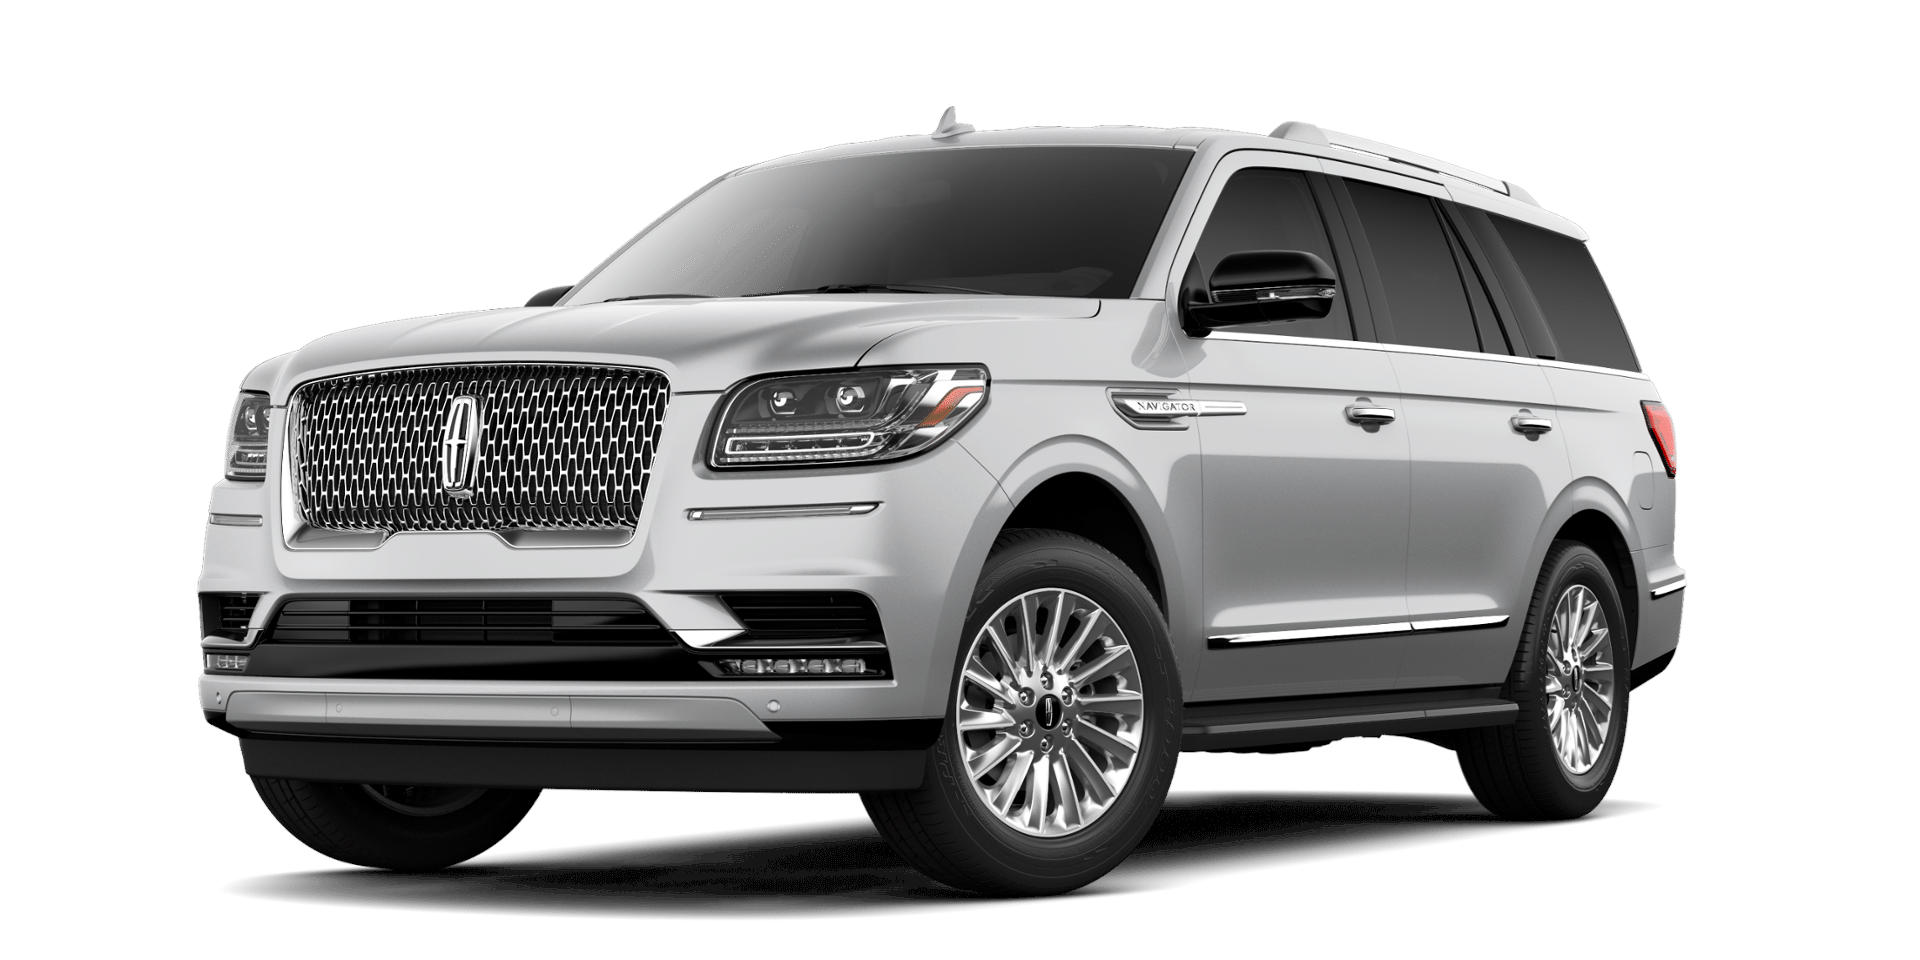 2019 Lincoln Navigator Premiere Full Specs, Features and Price | CarBuzz